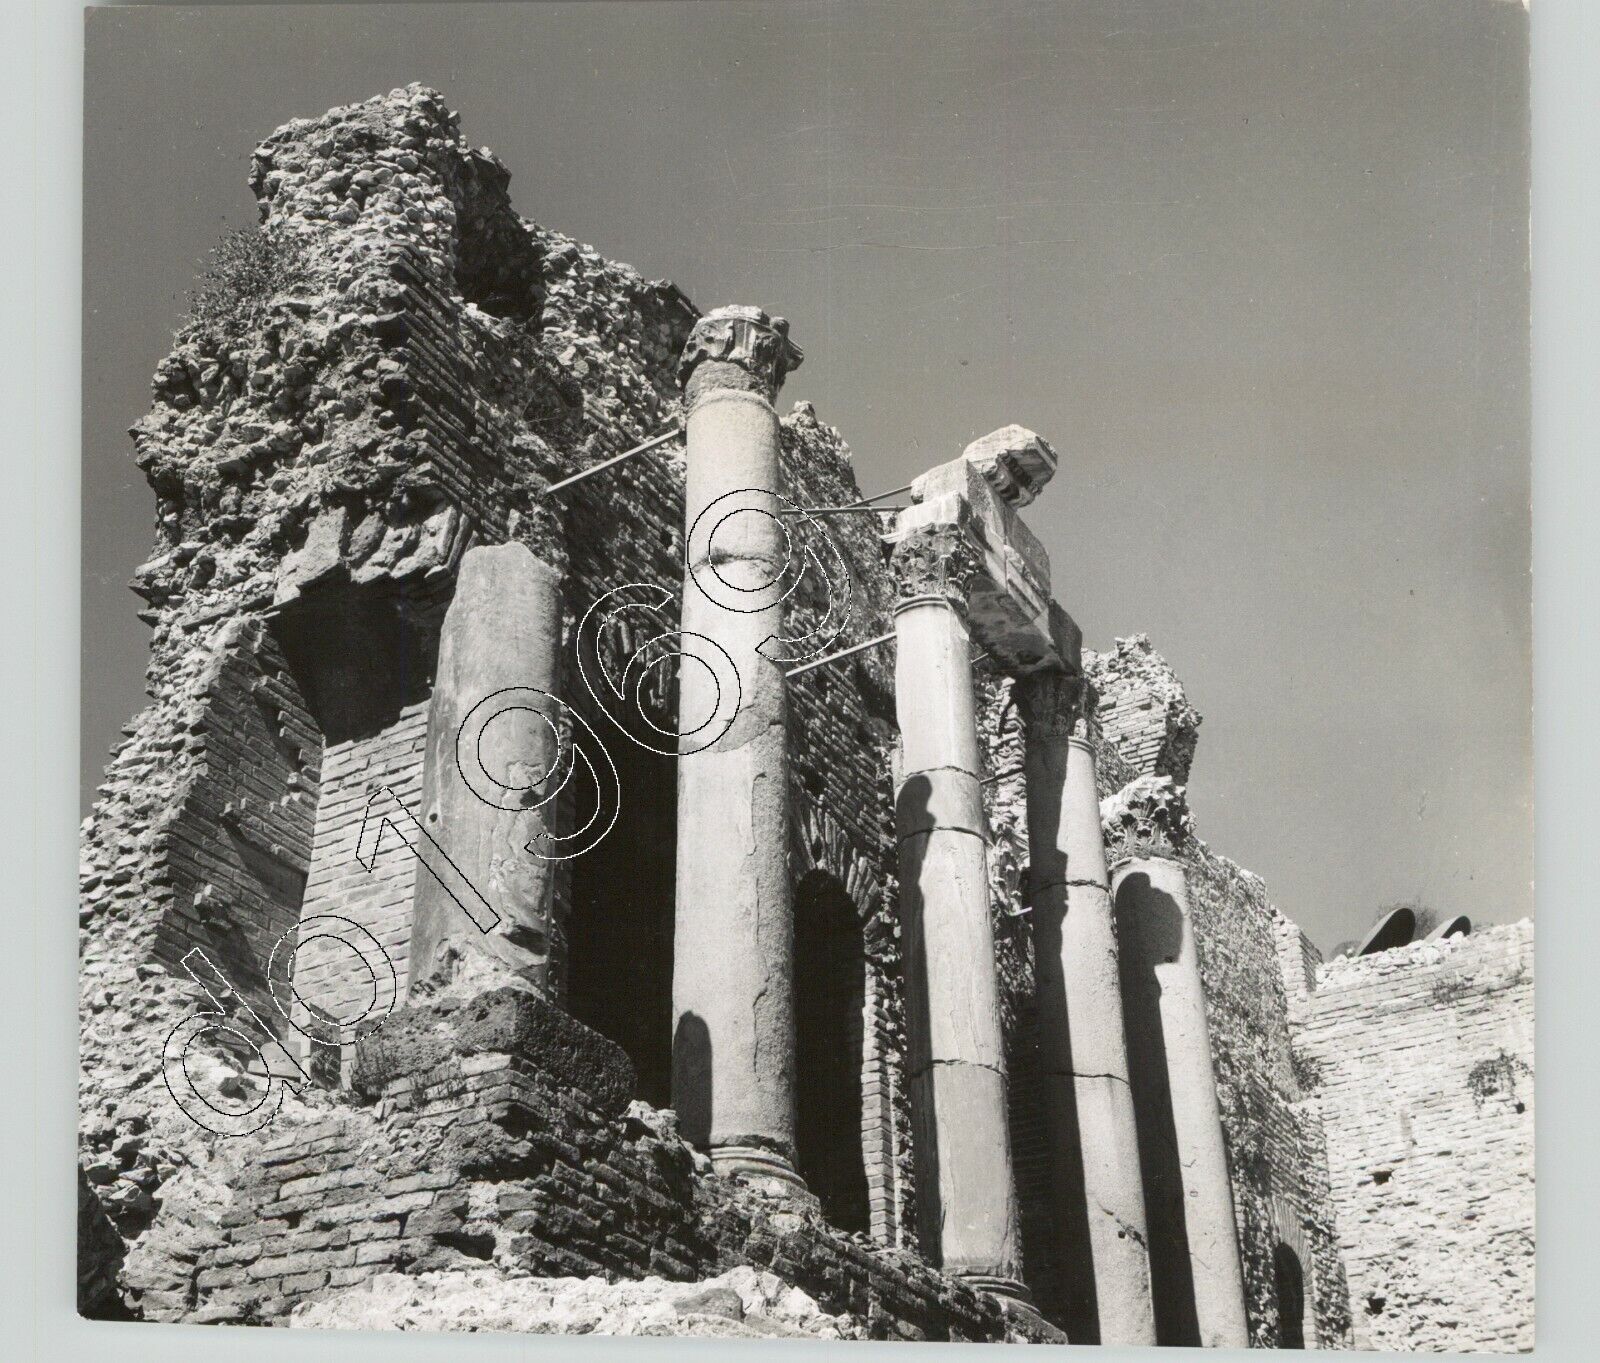 VTG ARCHITECTURE Ruins of Amphitheater @ Sicily Italy 1960s Press Photo 